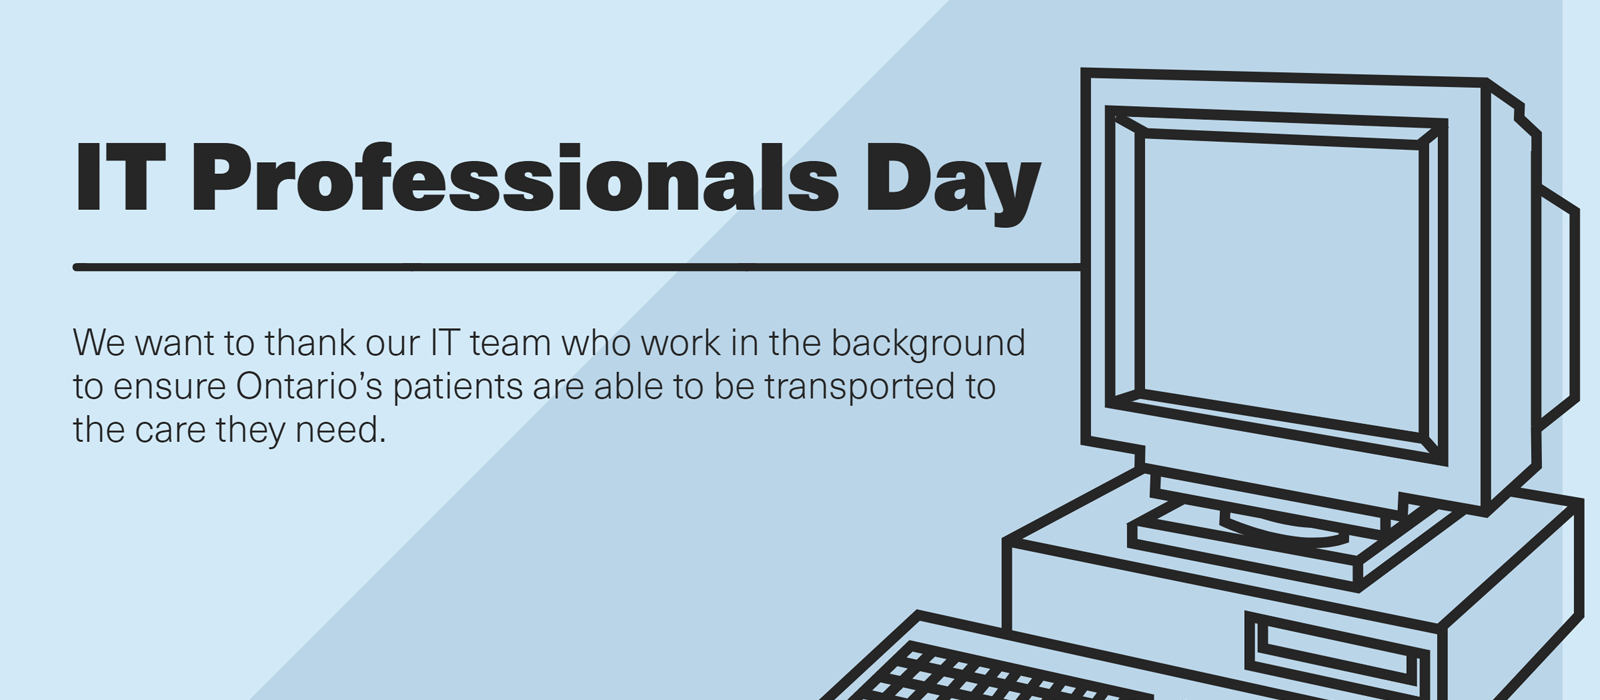 IT Professional Day Title with image of computer